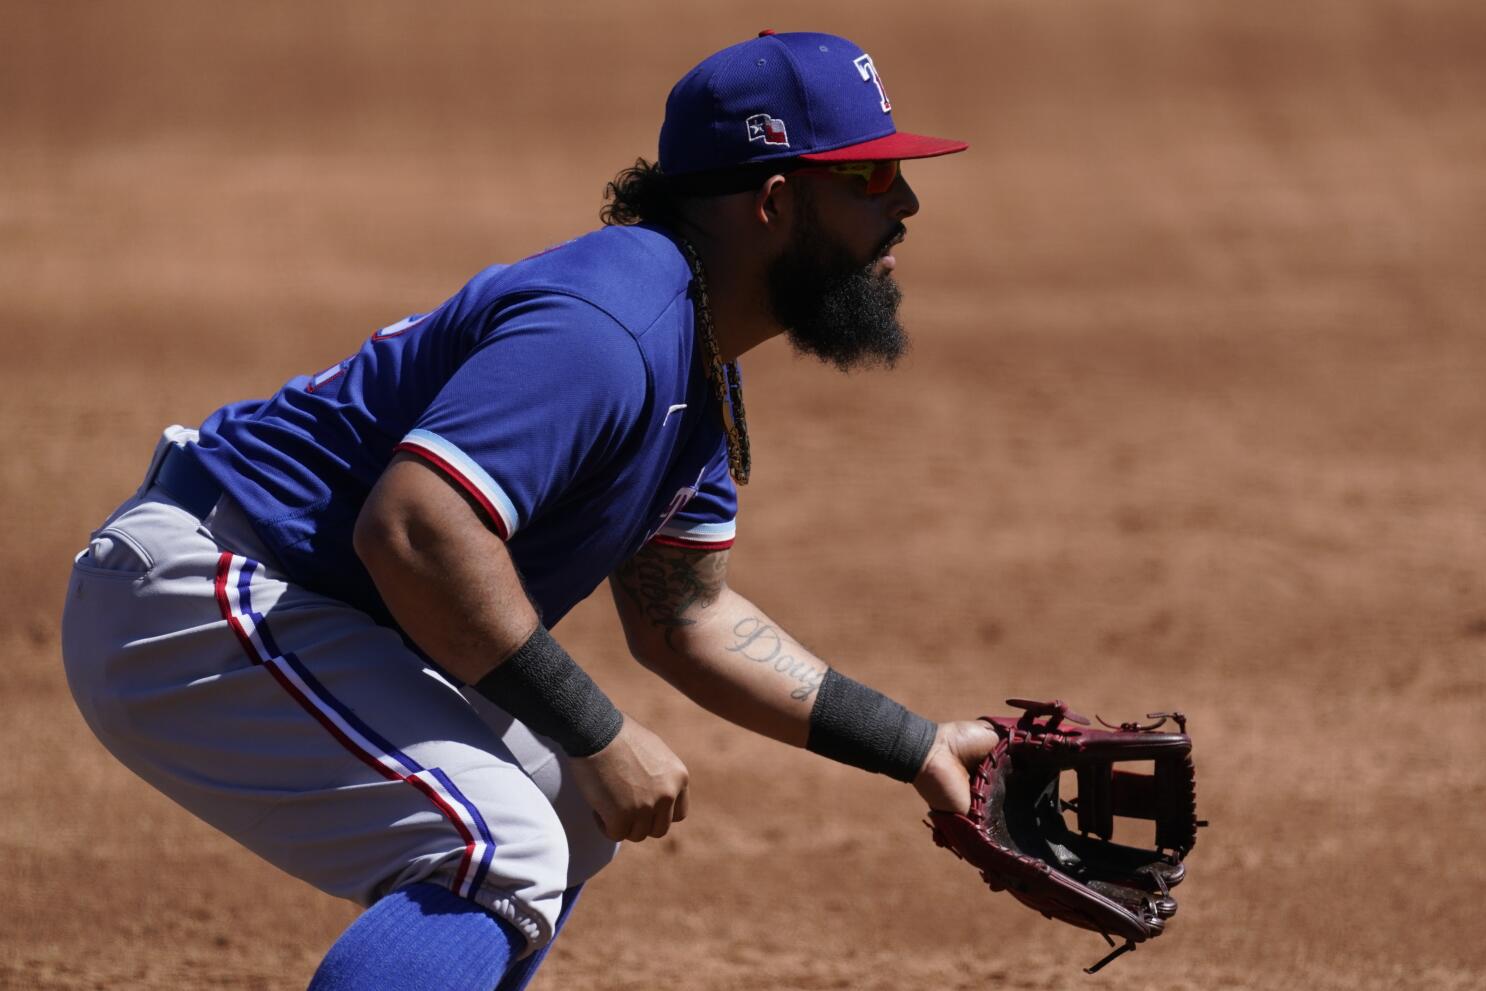 Rougned Odor working at third base for Texas Rangers